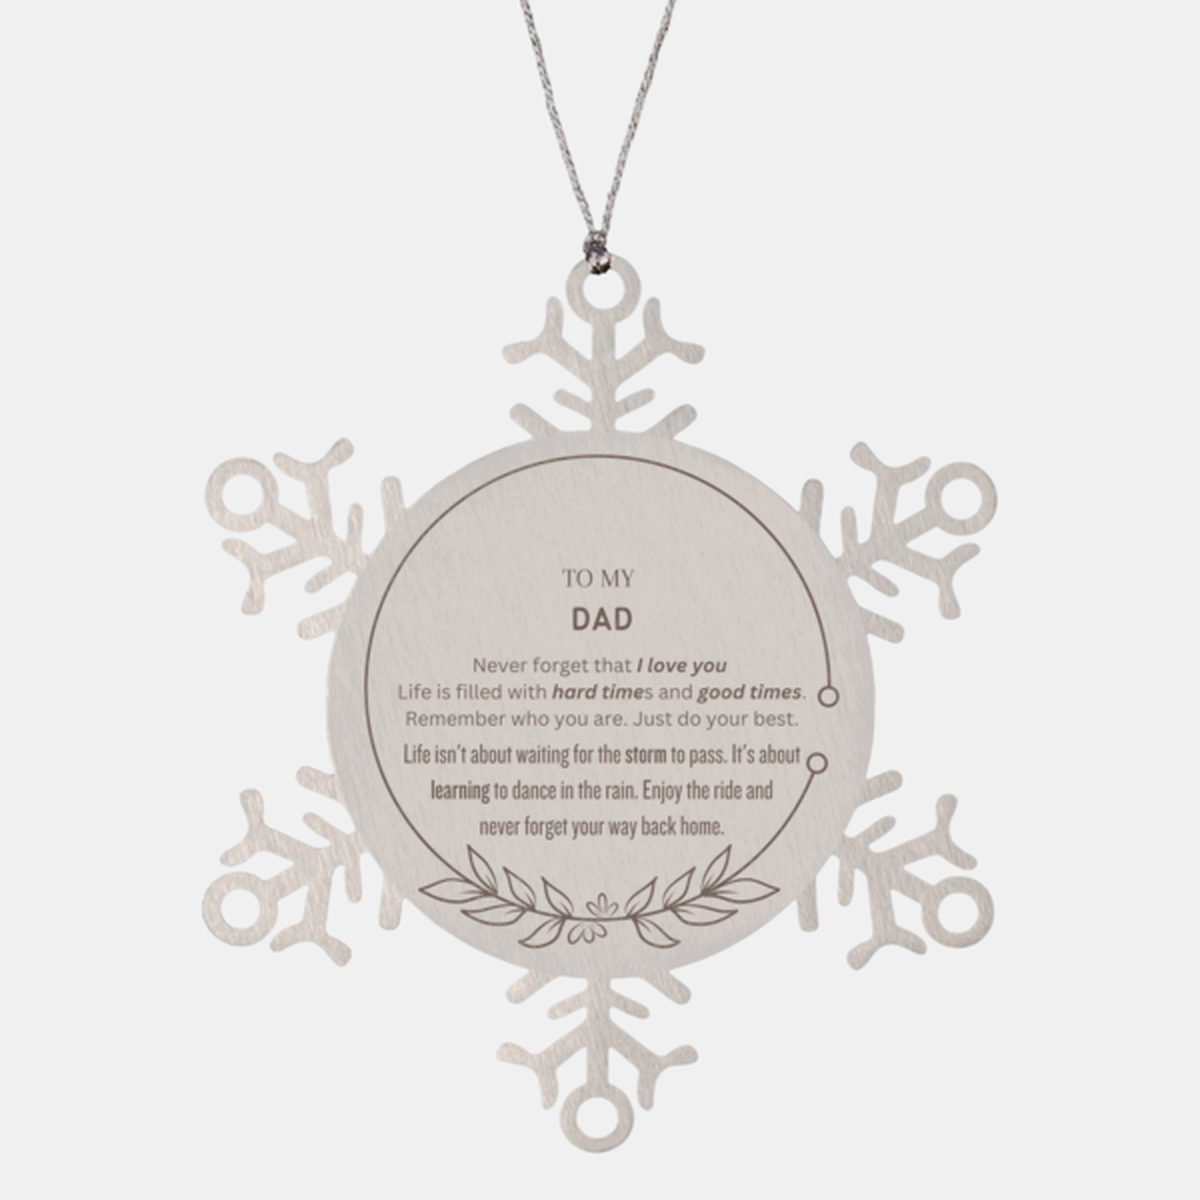 Christmas Dad Snowflake Ornament Gifts, To My Dad Thank You Gifts For Dad, Xmas Decorations Unique Gifts For Dad To My Dad Never forget that I love you life is filled with hard times and good times. Remember who you are. Just do your best